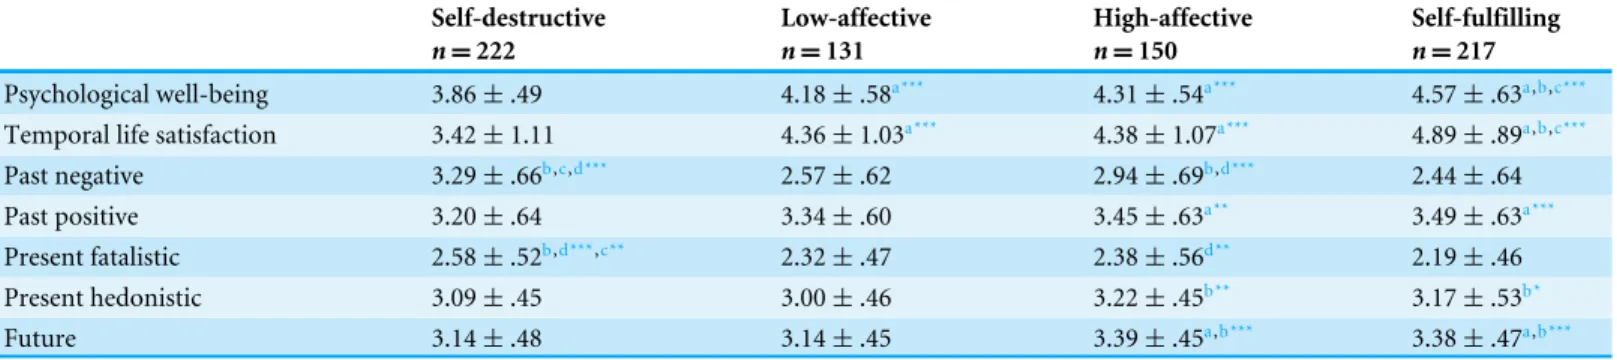 Table 1 Mean scores and standard deviation (sd) in psychological well-being, temporal life satisfaction and the time perspective dimensions for each affective profile.